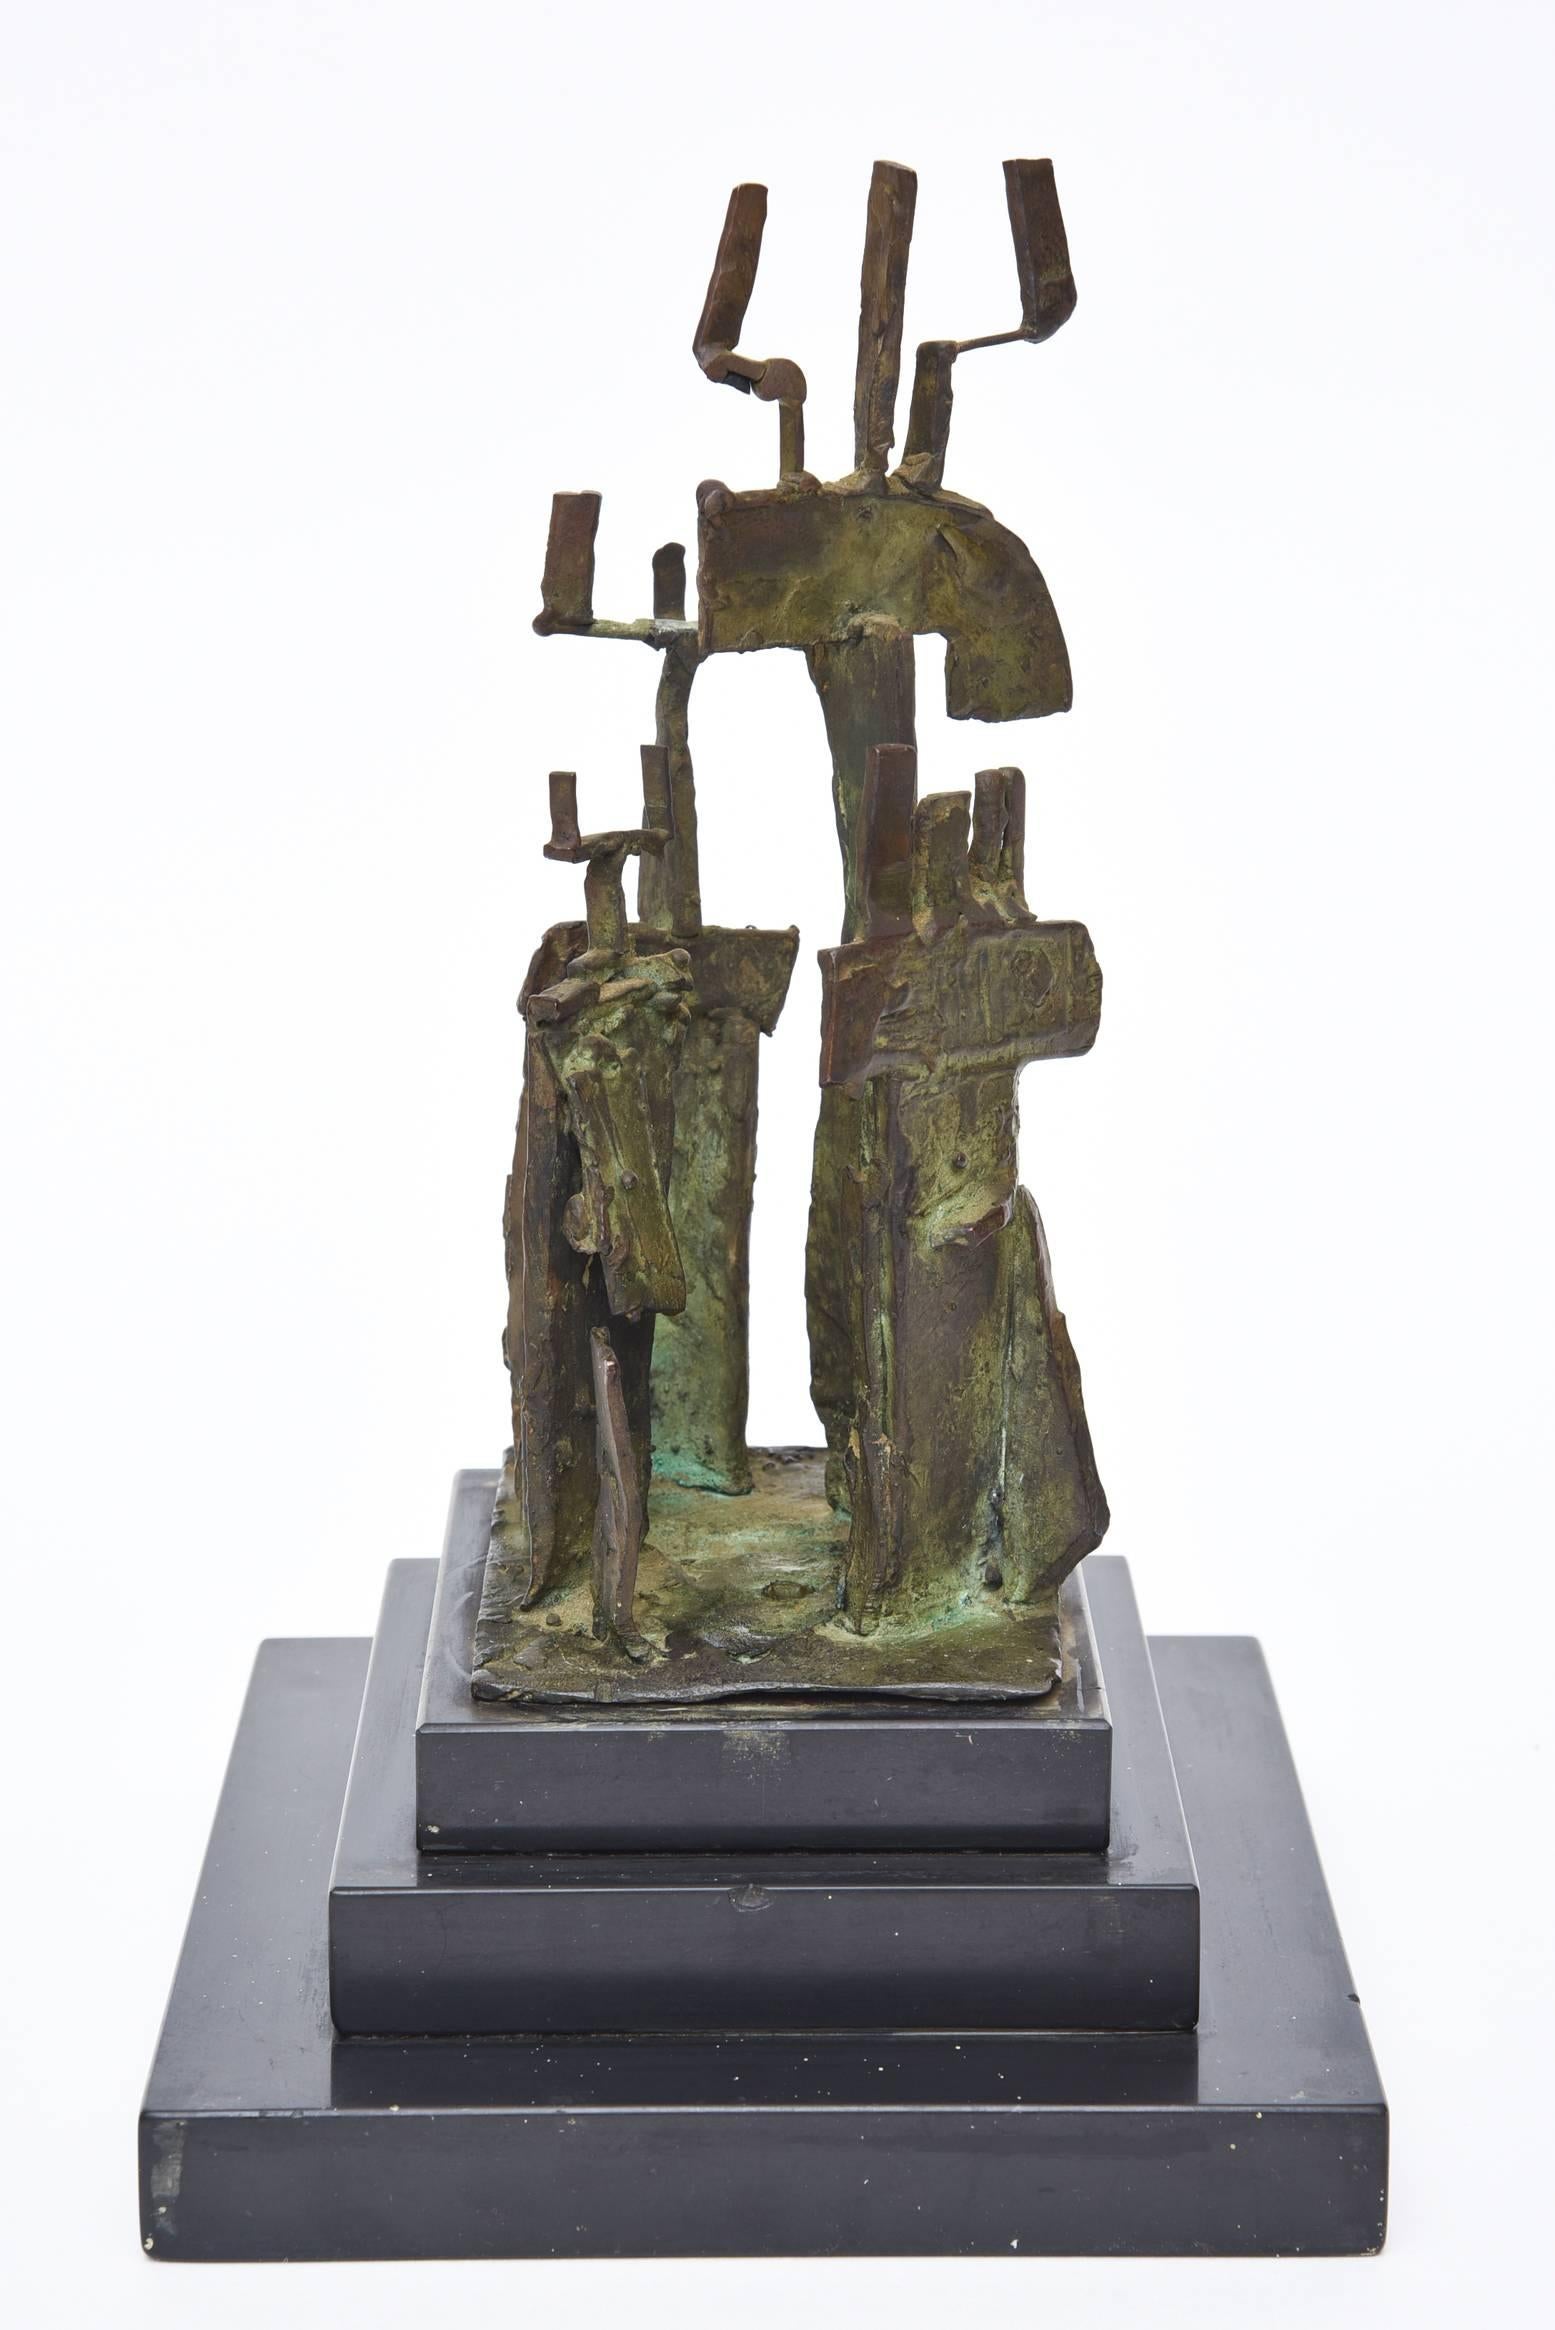 The three-step black marble base is home to the bronze Mid-Century Modern sculpture by Irma Stoloff, a NY artist. It is titled 